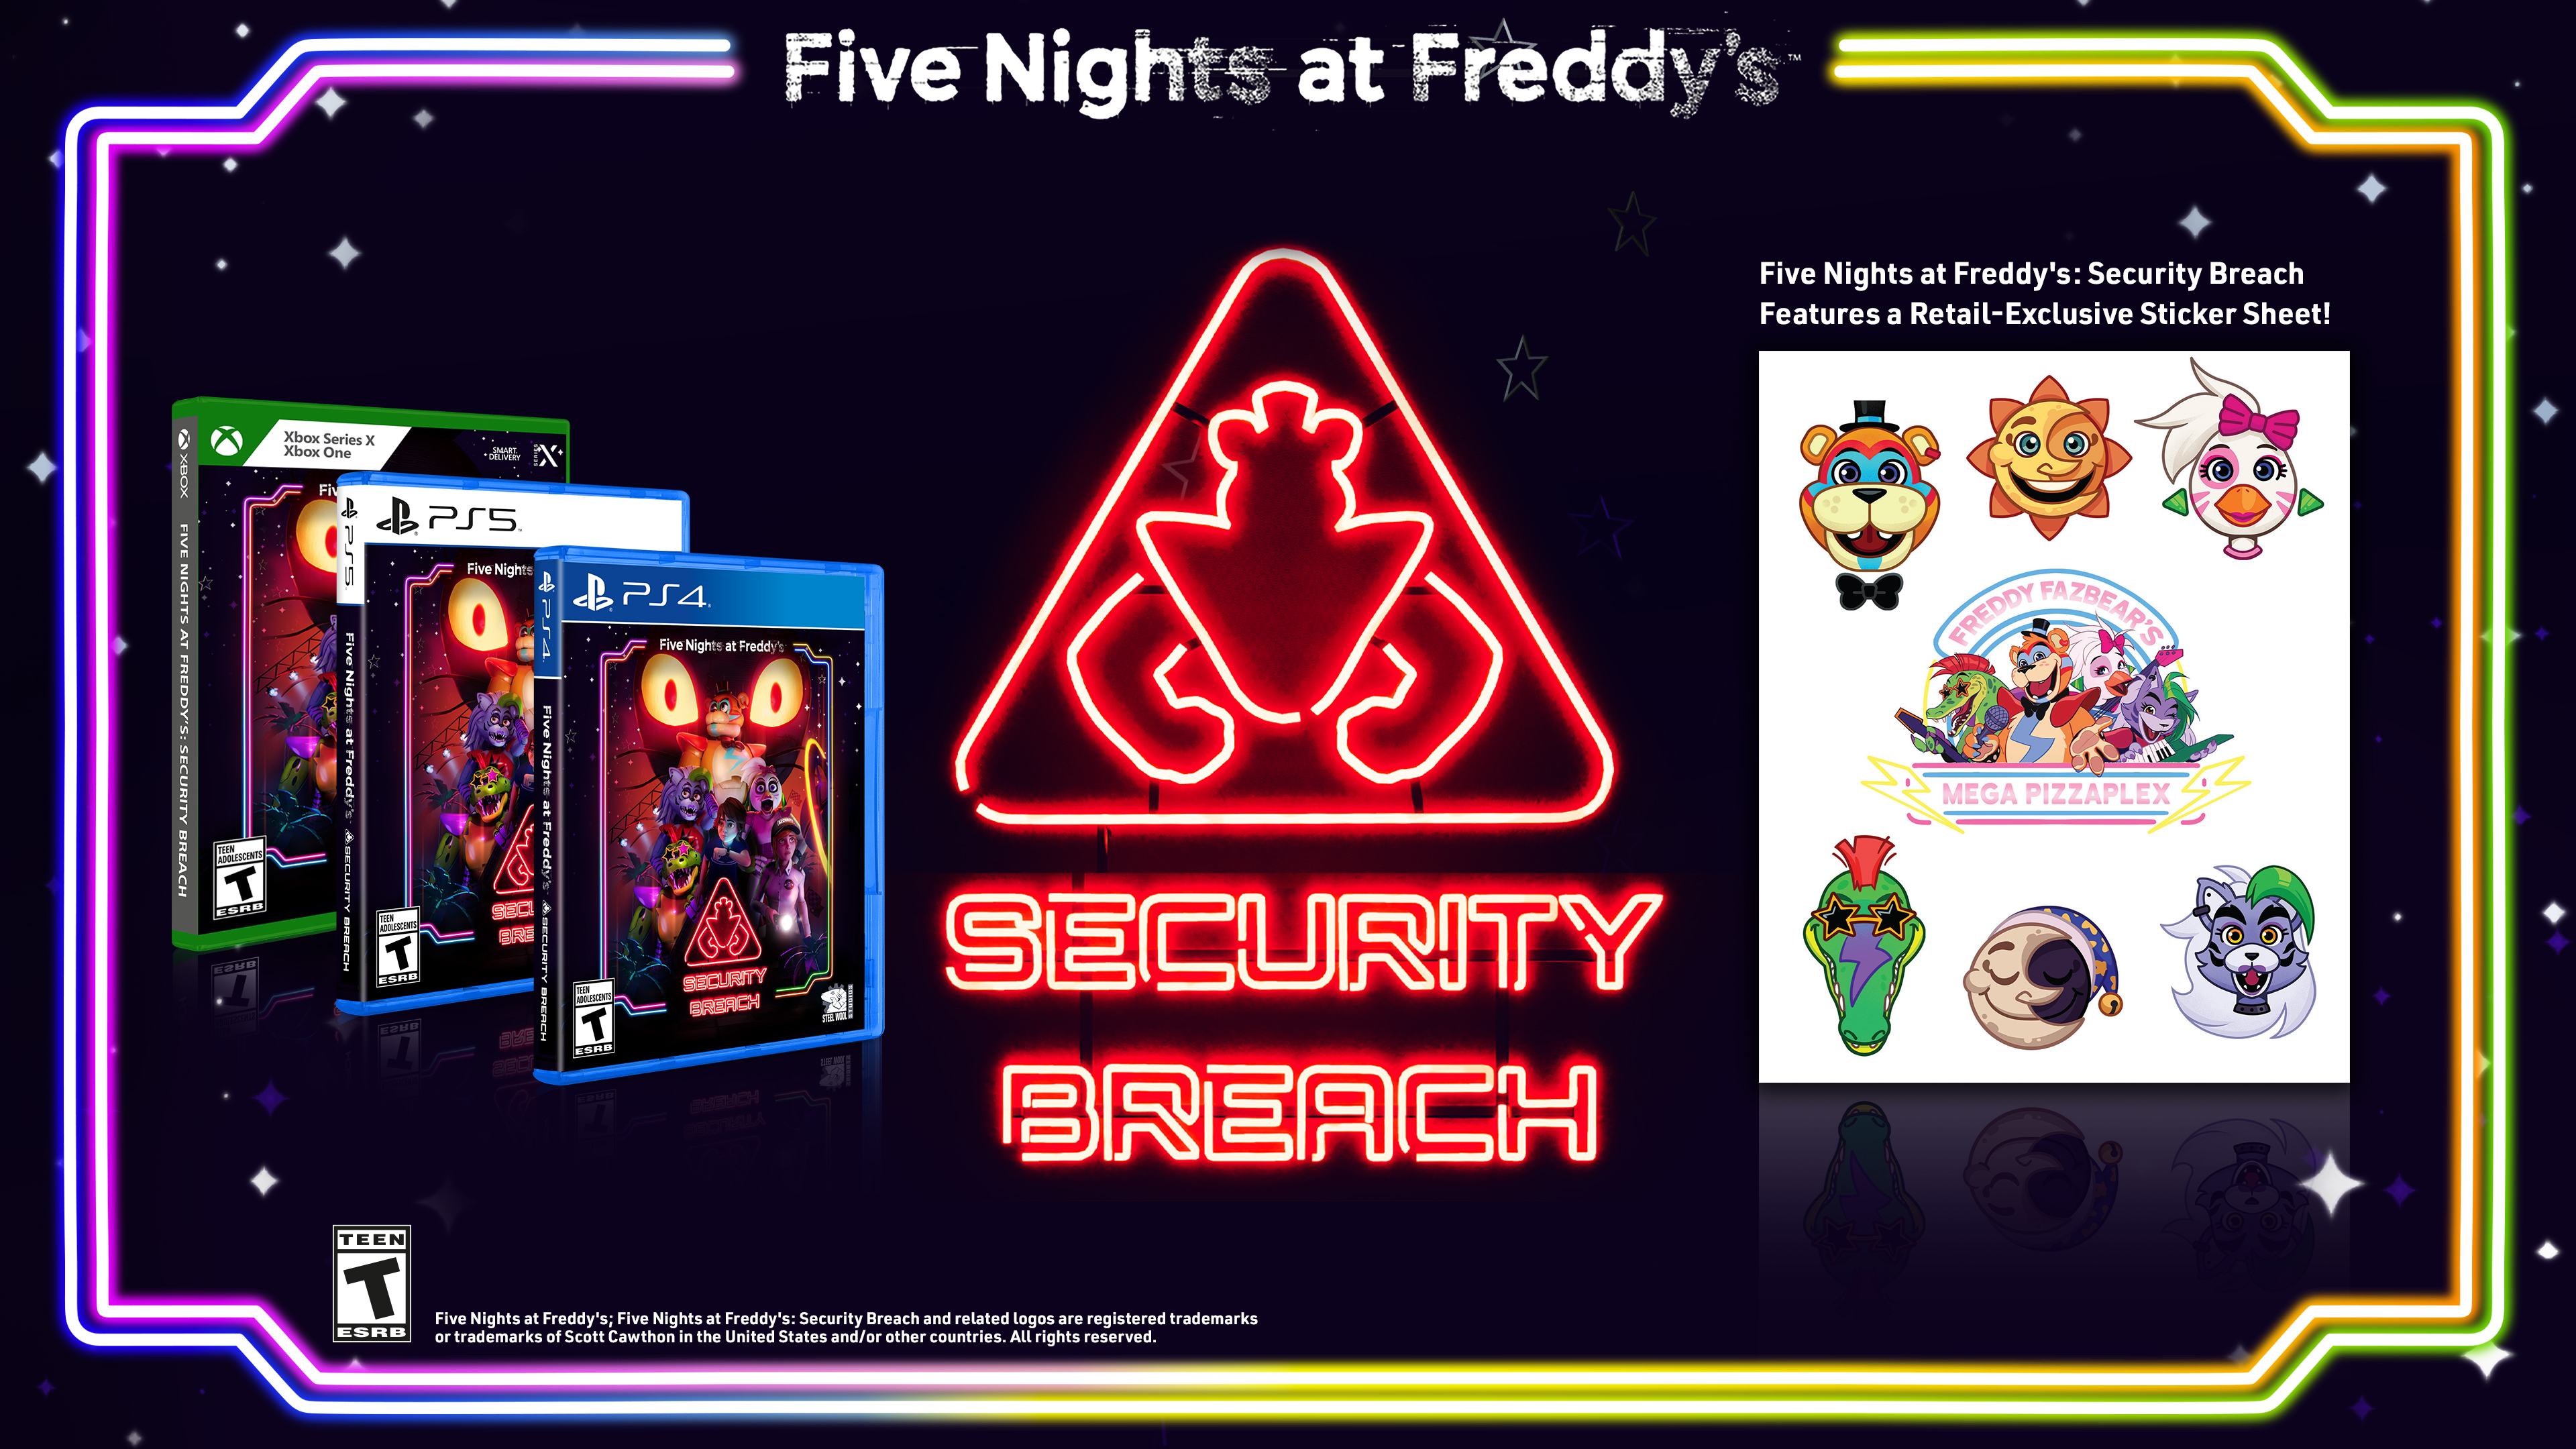 Five Nights at Freddy's Security Breach Release Date Announced